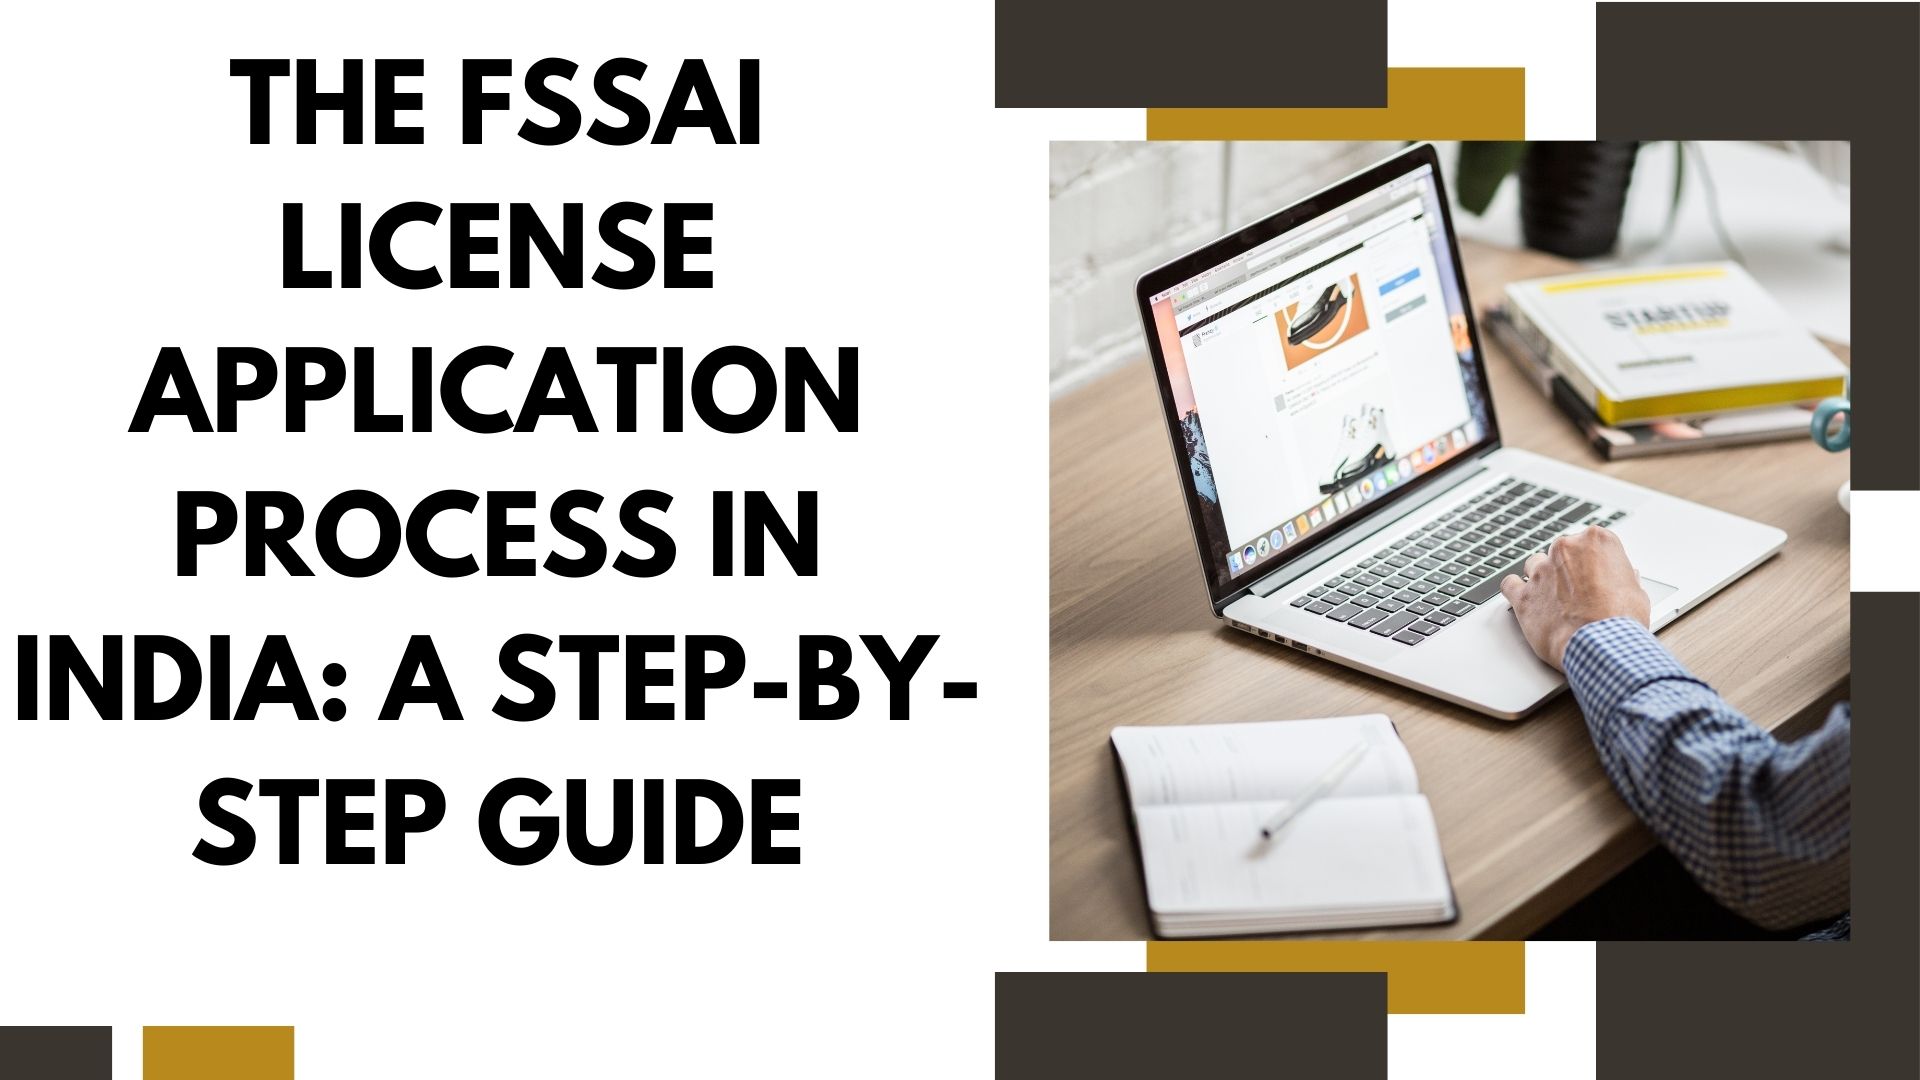 The FSSAI License Application Process in India: A Step-by-Step Guide